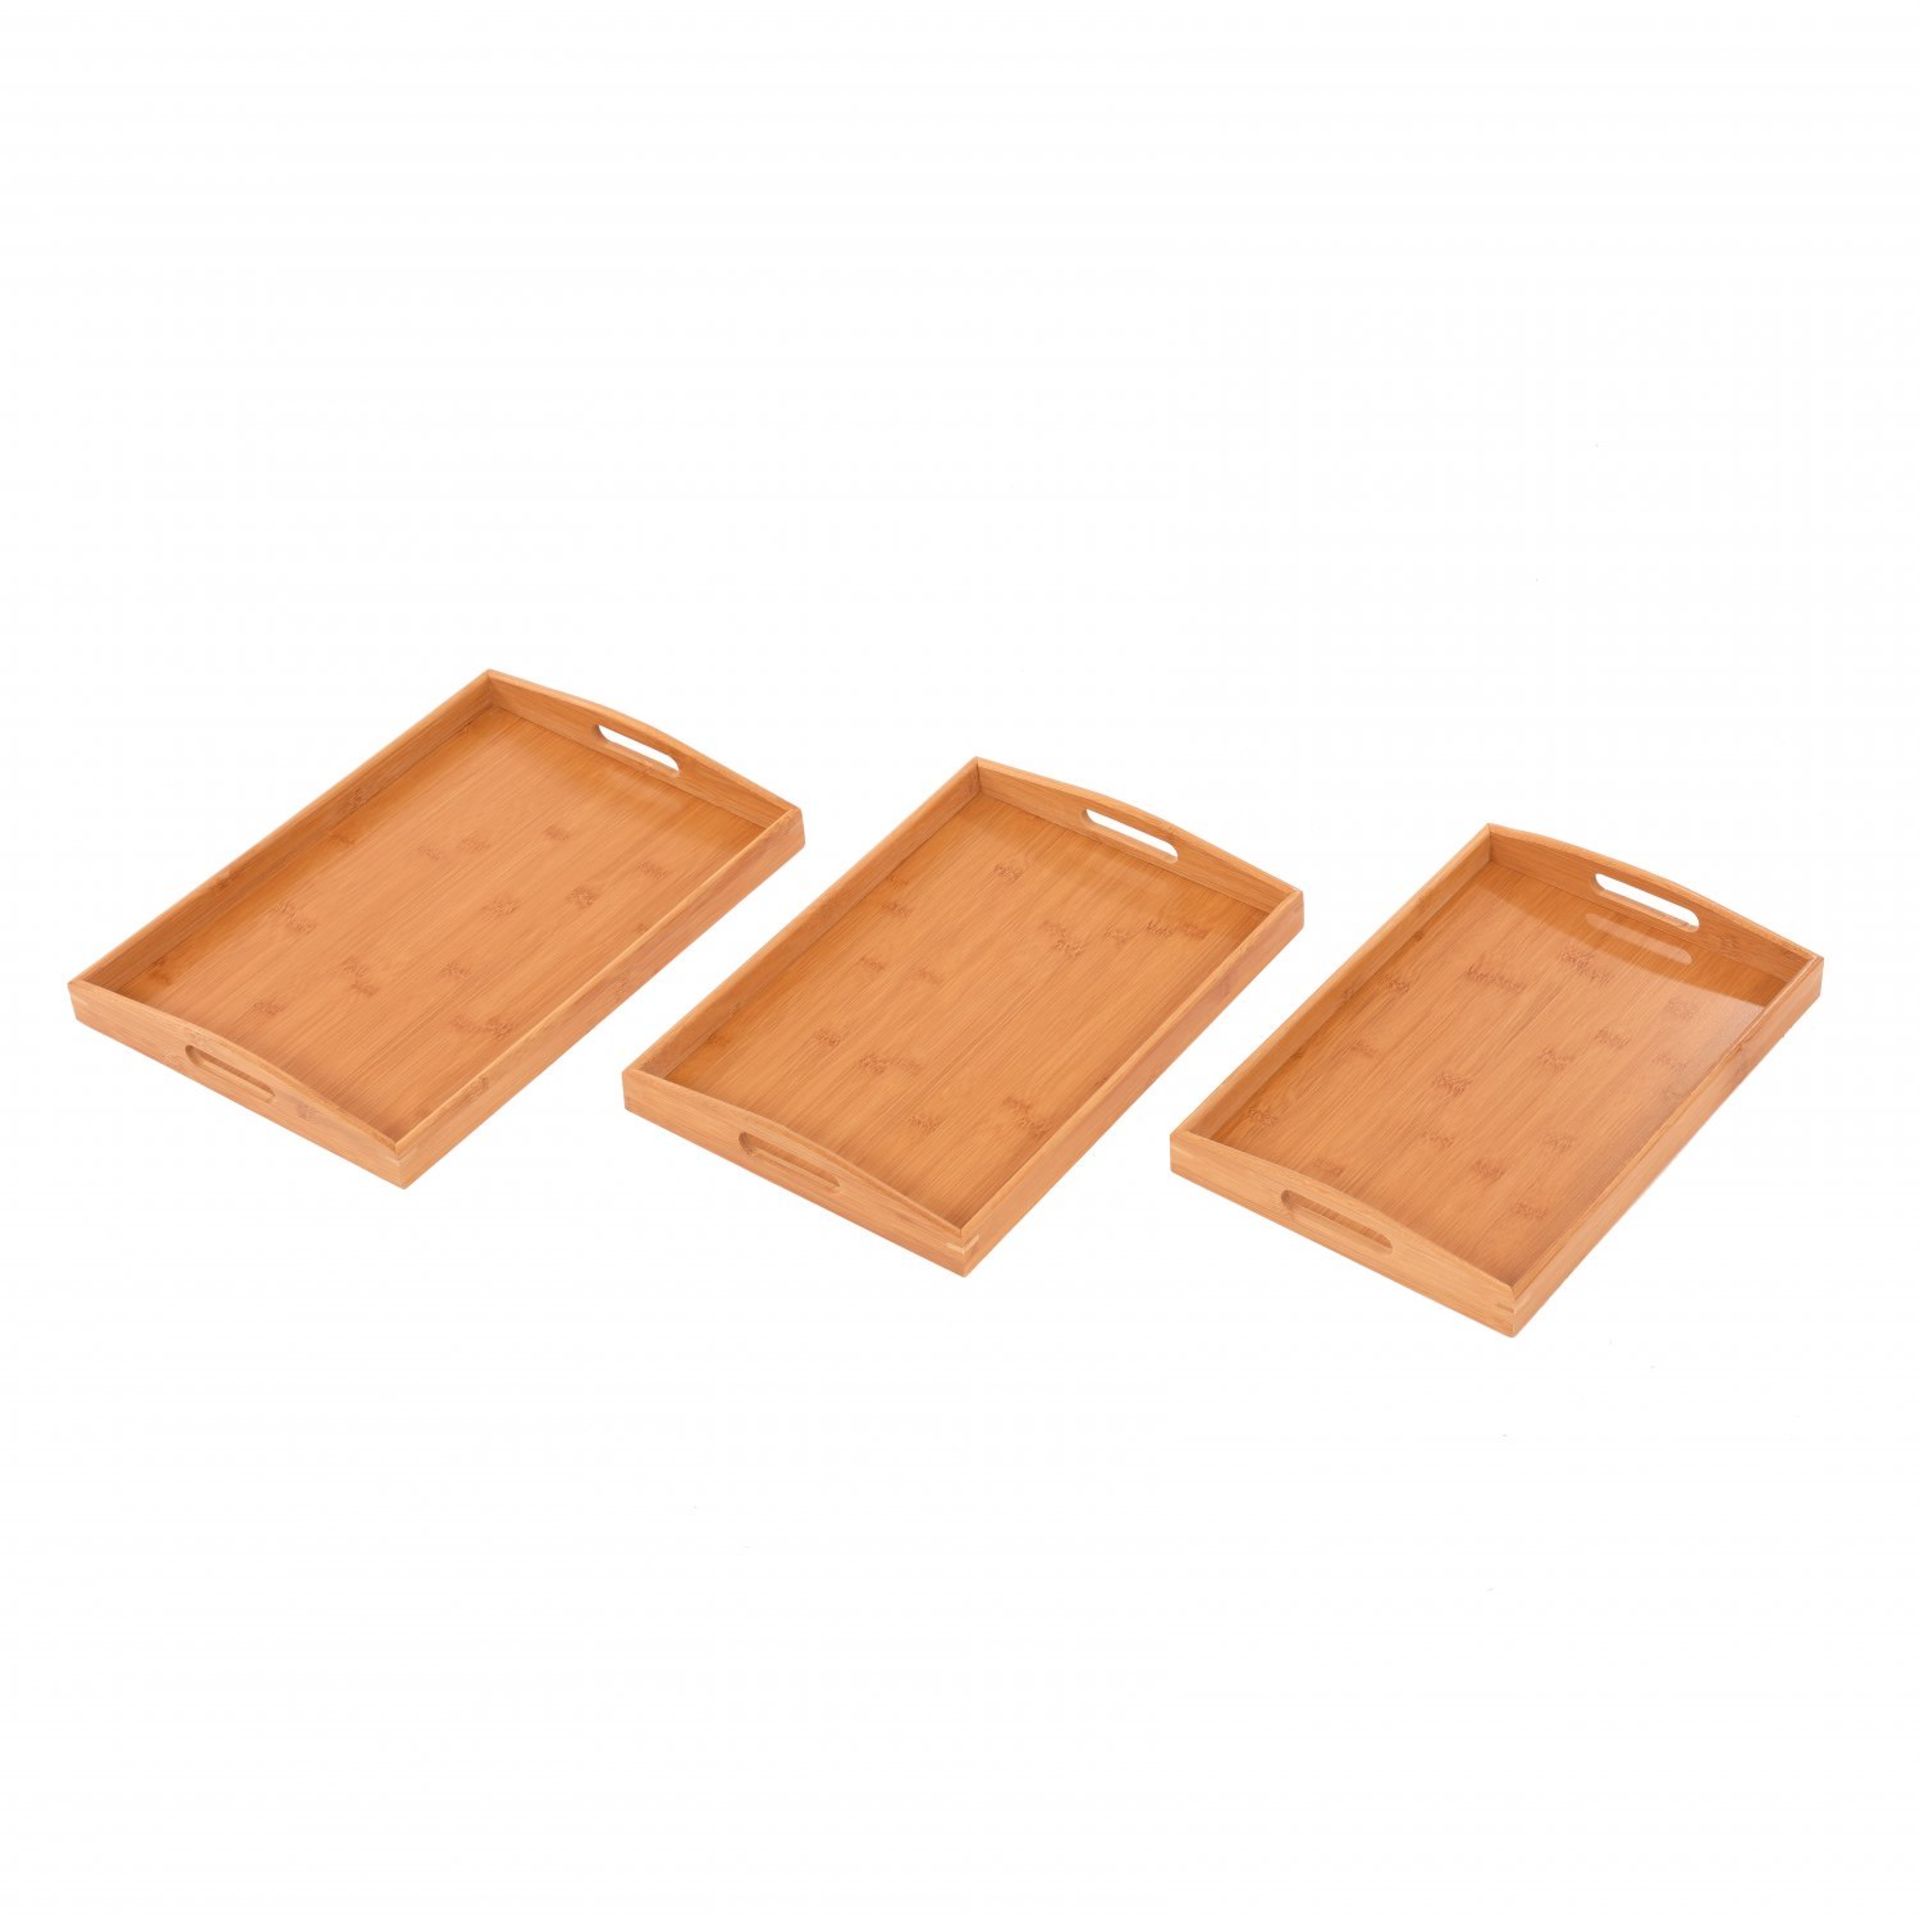 (SP501) Set of 3 Wooden Bamboo Breakfast Serving Trays Platters The serving trays are perfec... - Image 2 of 2